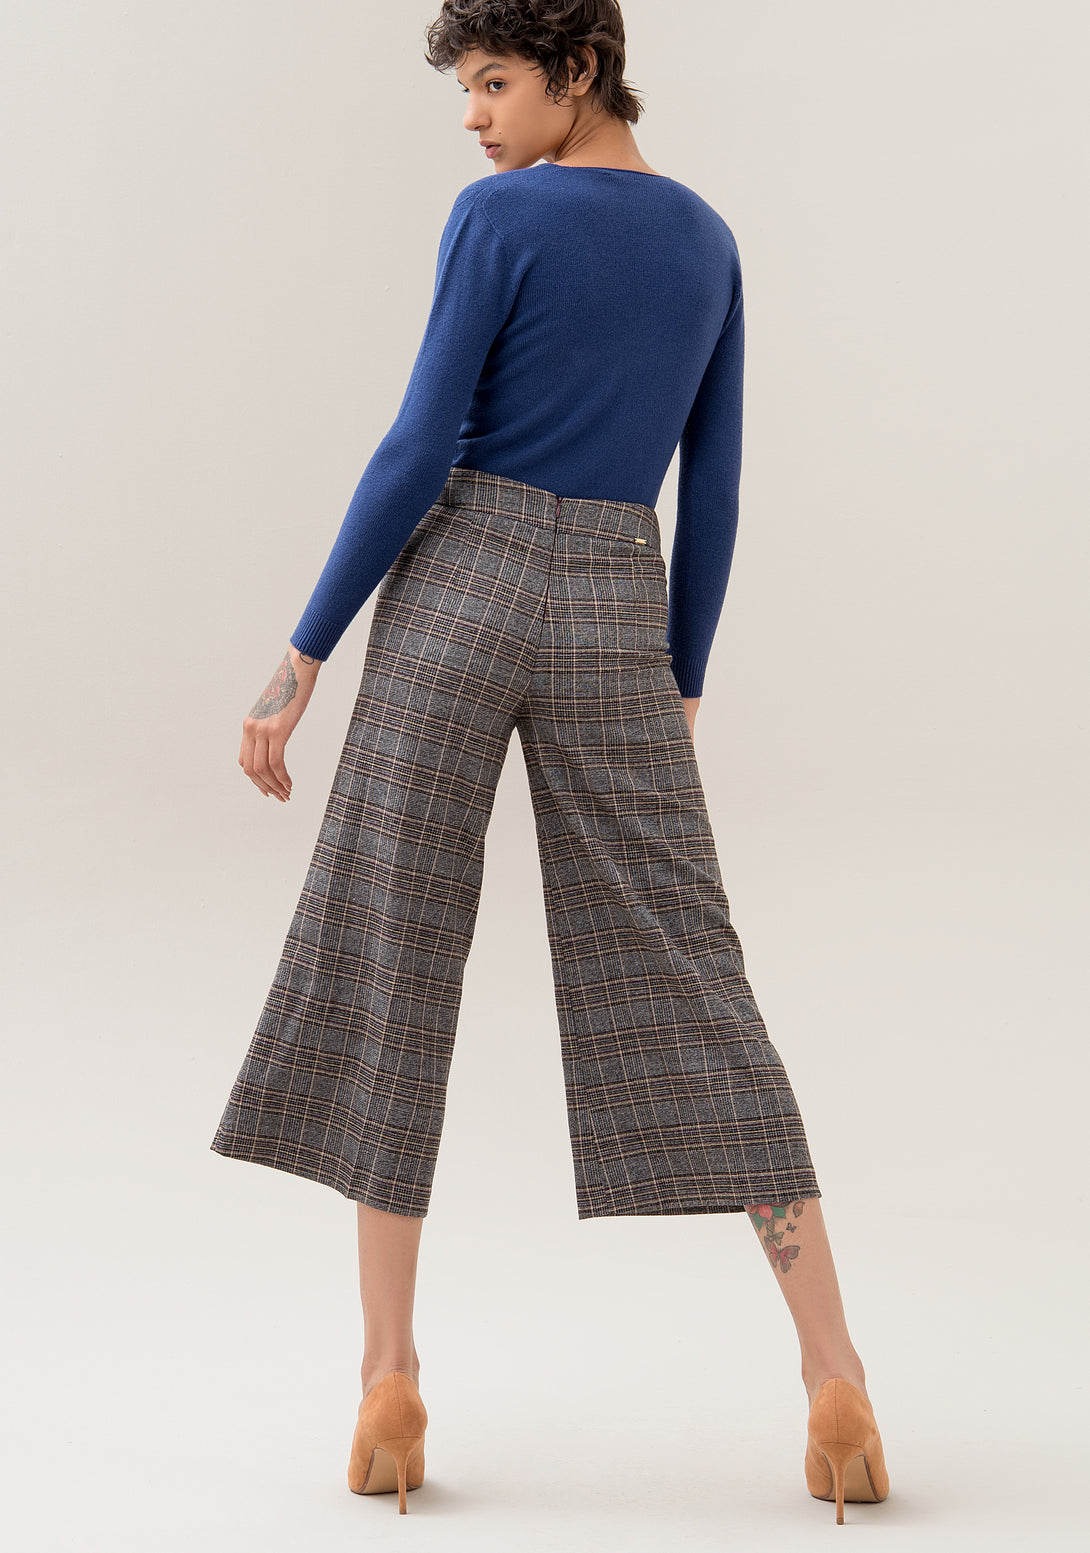 Pants culotte regular fit made in Prince of Wales fabric